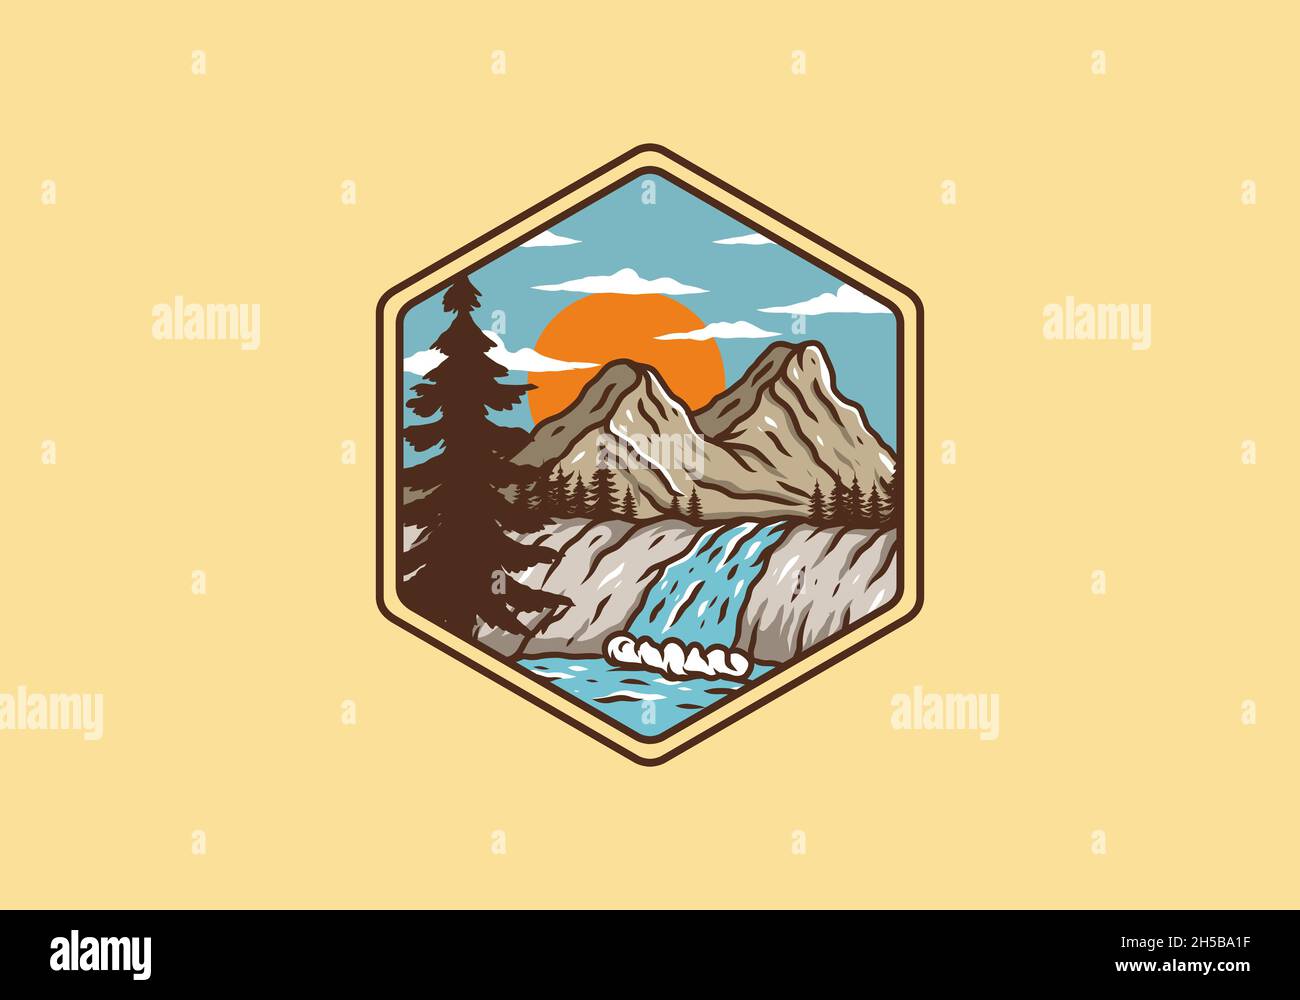 illustration drawing of mountain and waterfall design Stock Vector